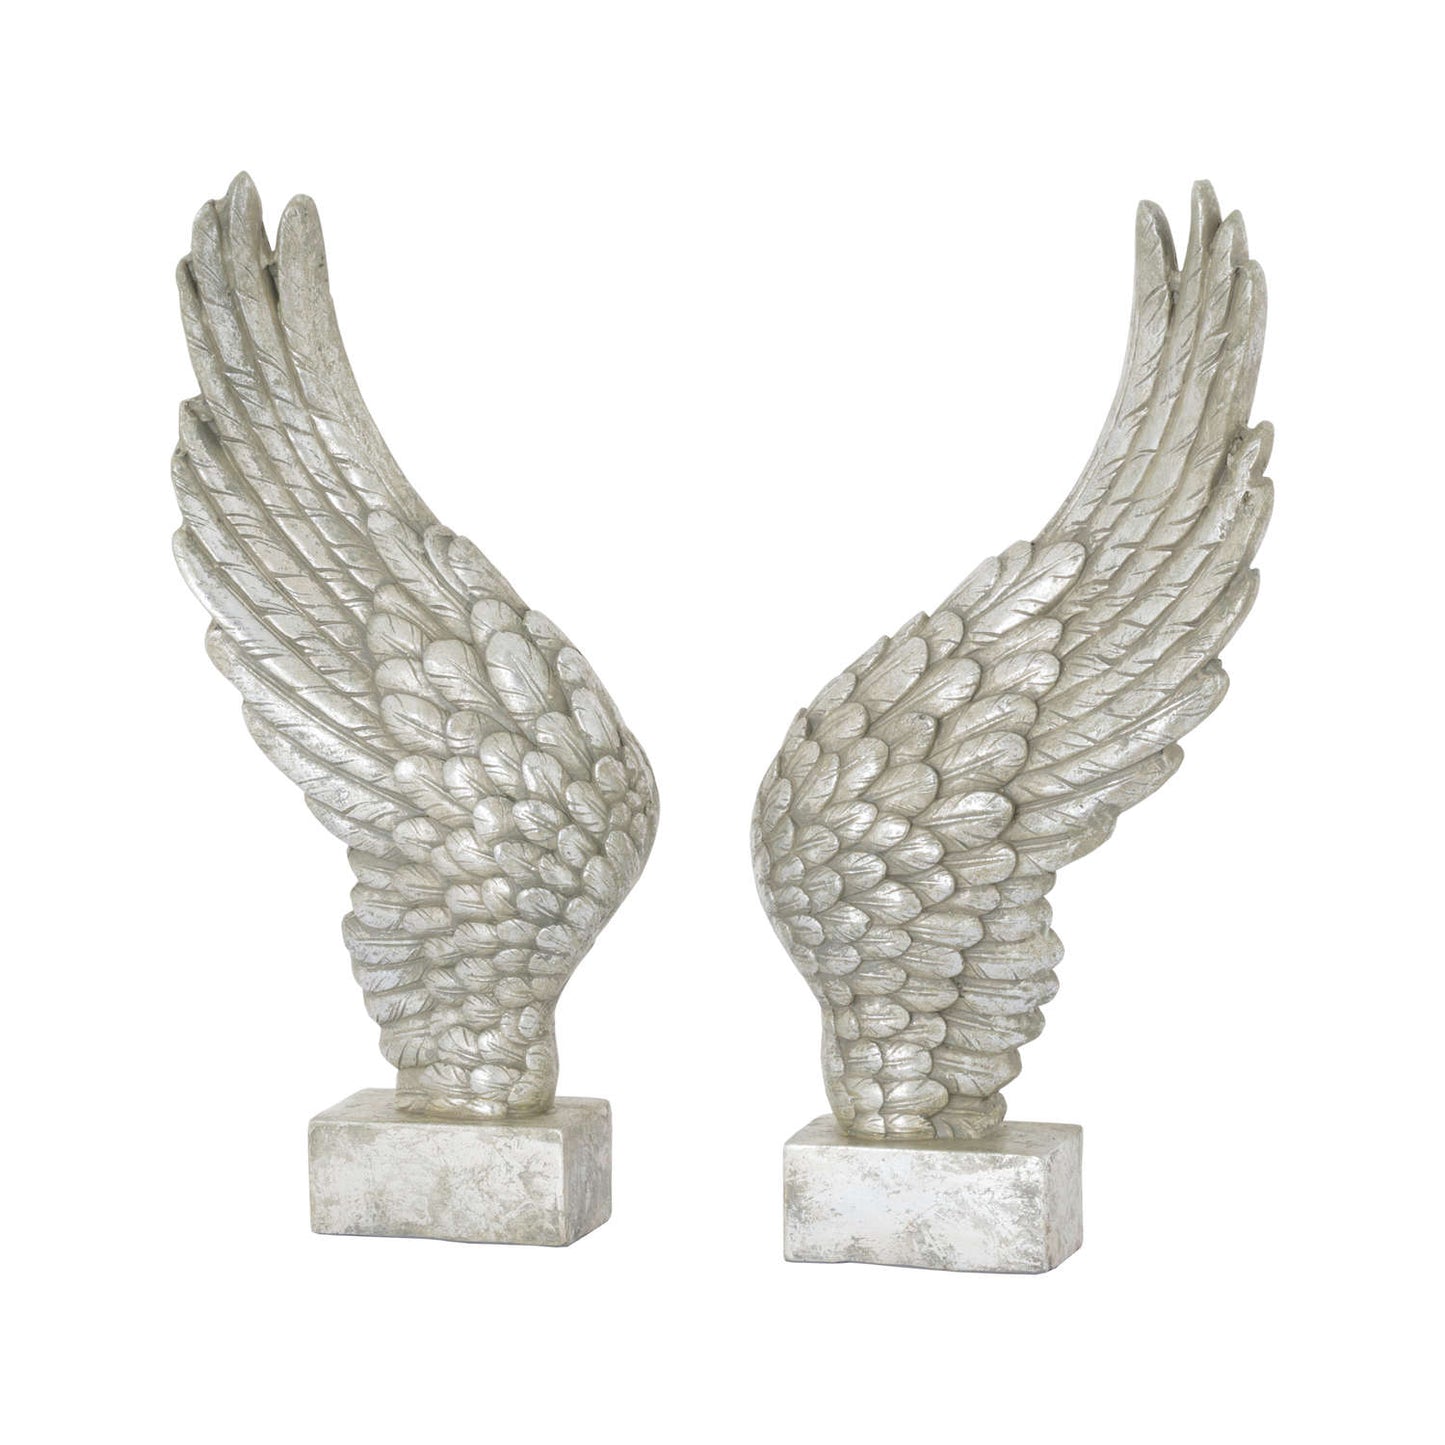 Antique Silver Angel Wings Ornament 49.5cm